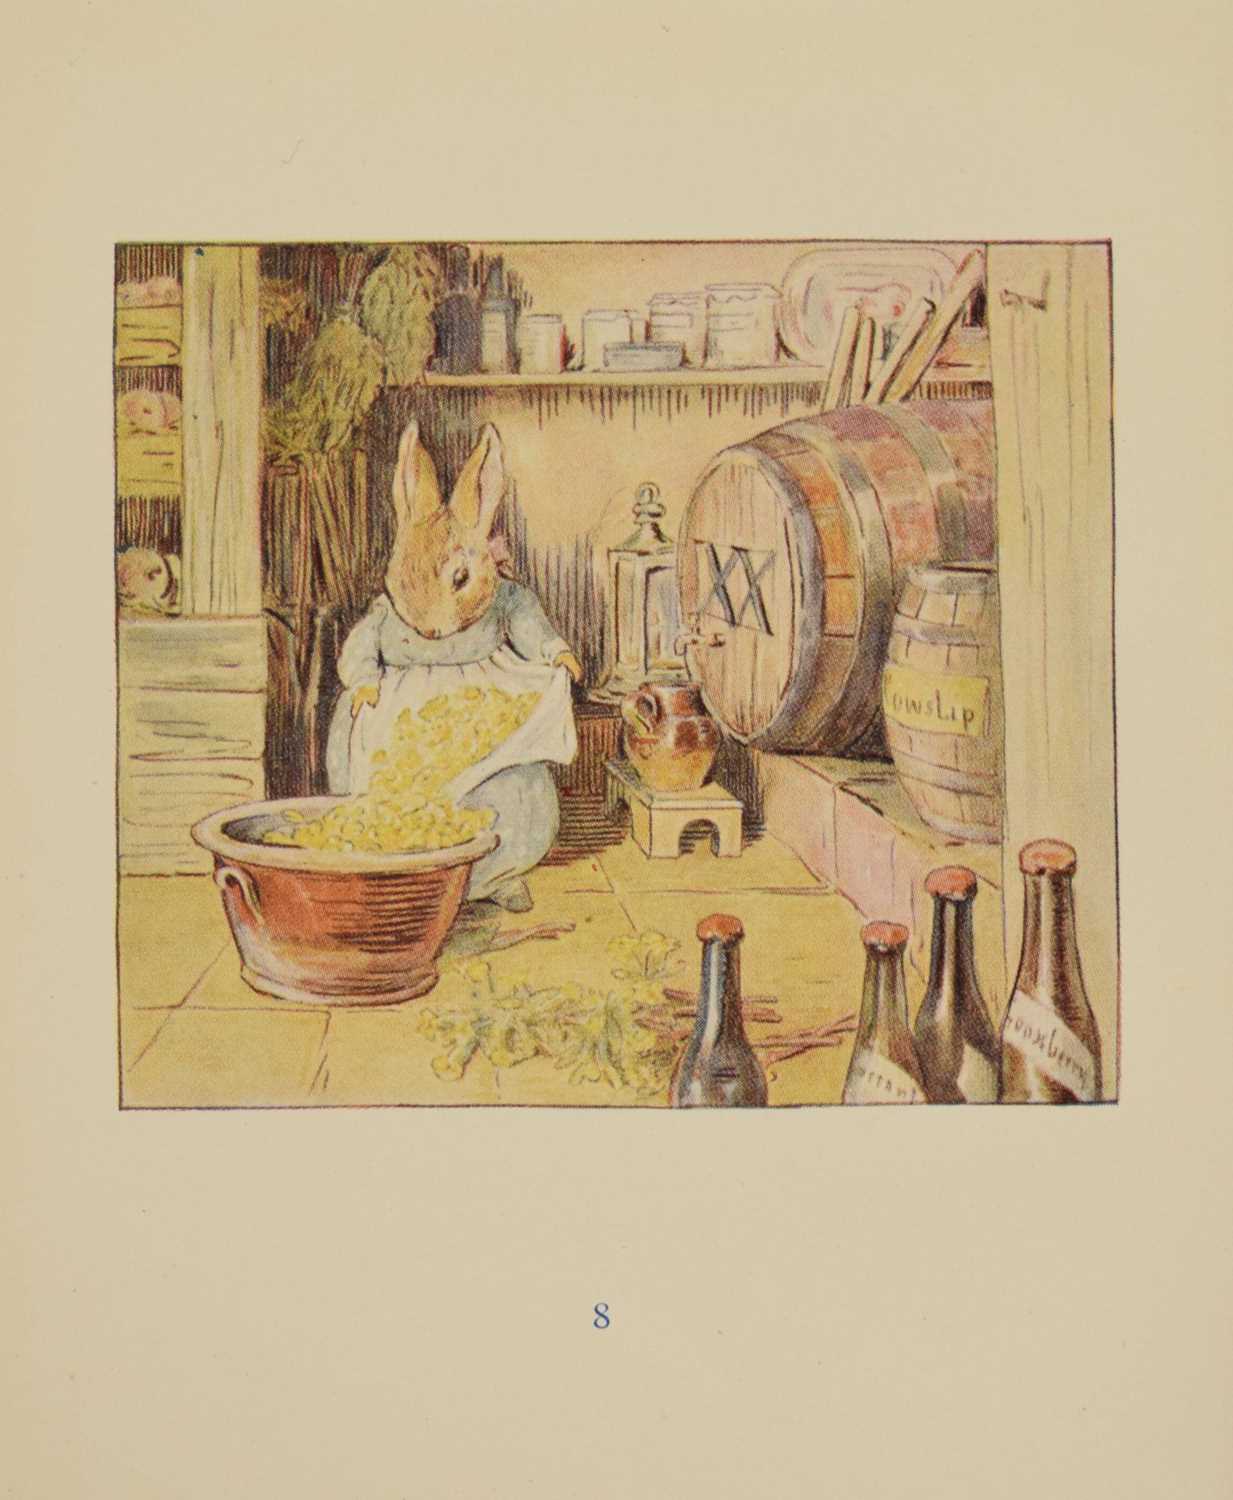 Potter, Beatrix - 'Cecily Parsley's Nursery Rhymes' - First edition - Image 12 of 37